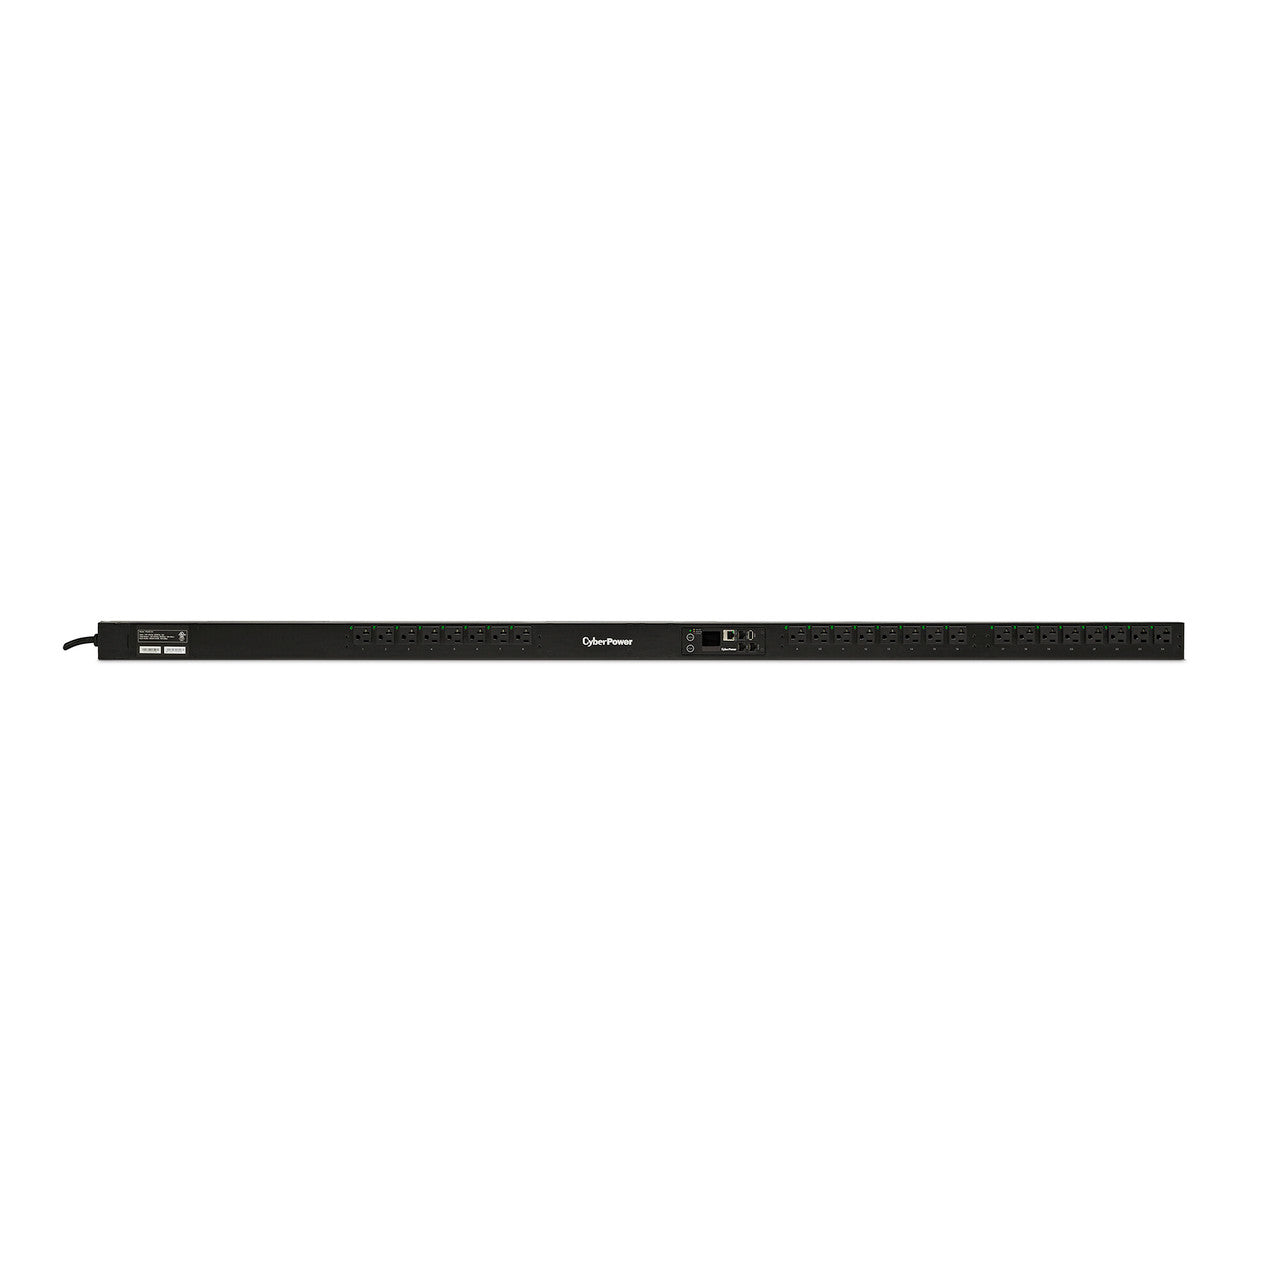 CyberPower PDU41101 Switched PDU 20A SNMP (L)5-20P Input 120V (24) NEMA5-20R Outlets 10ft Cord 3Yr Wty